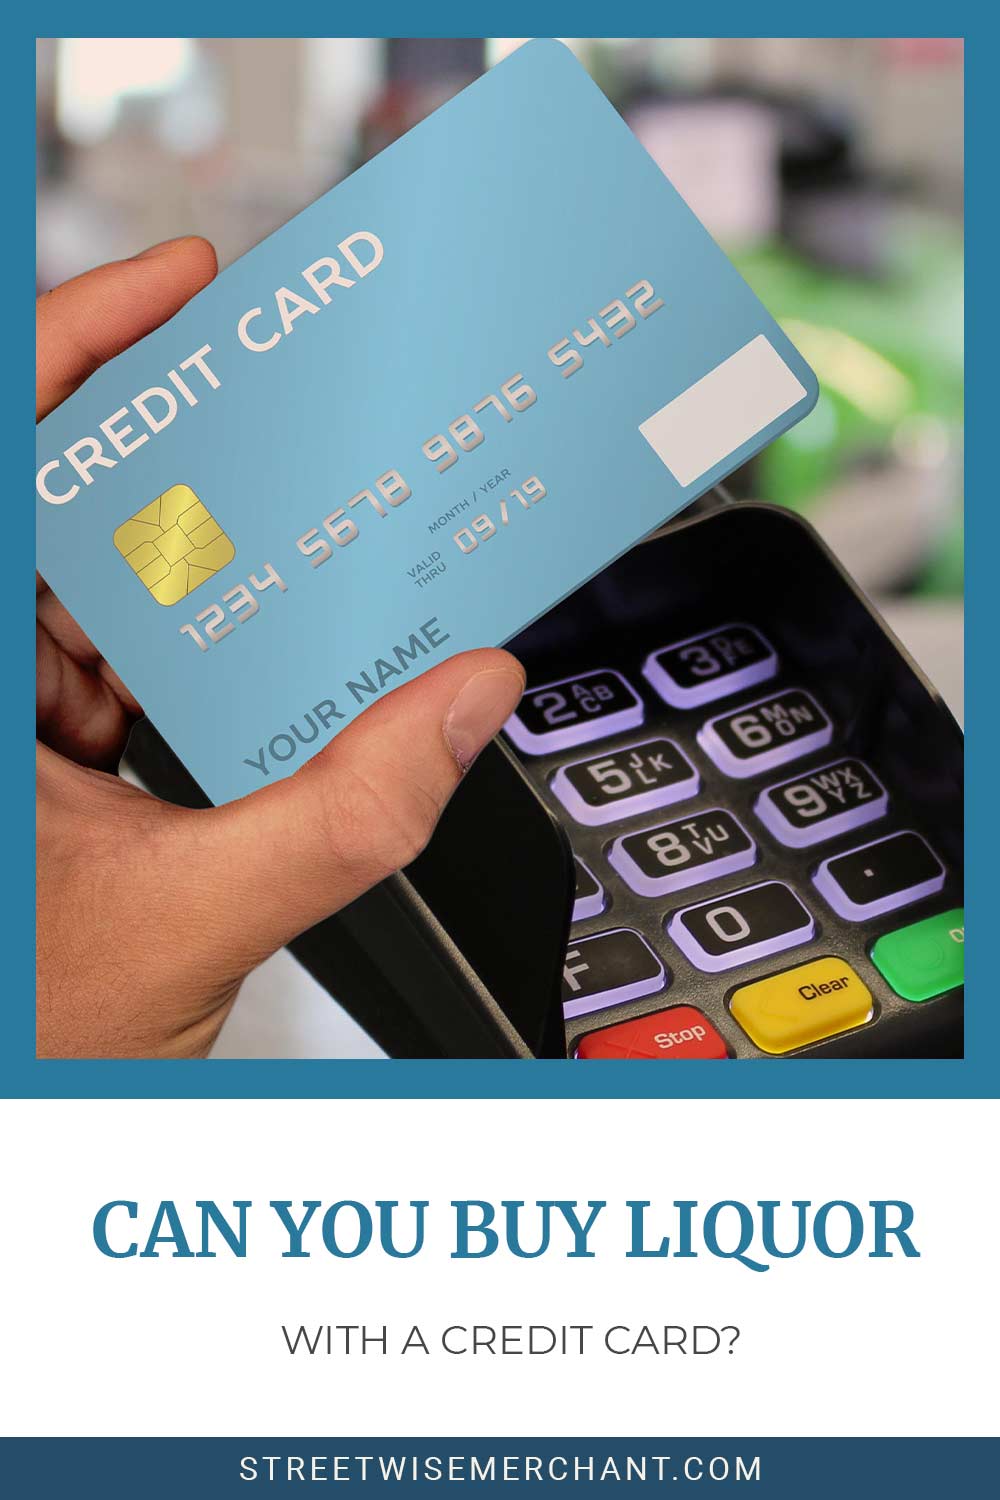 Can You Buy Liquor With a Credit Card?